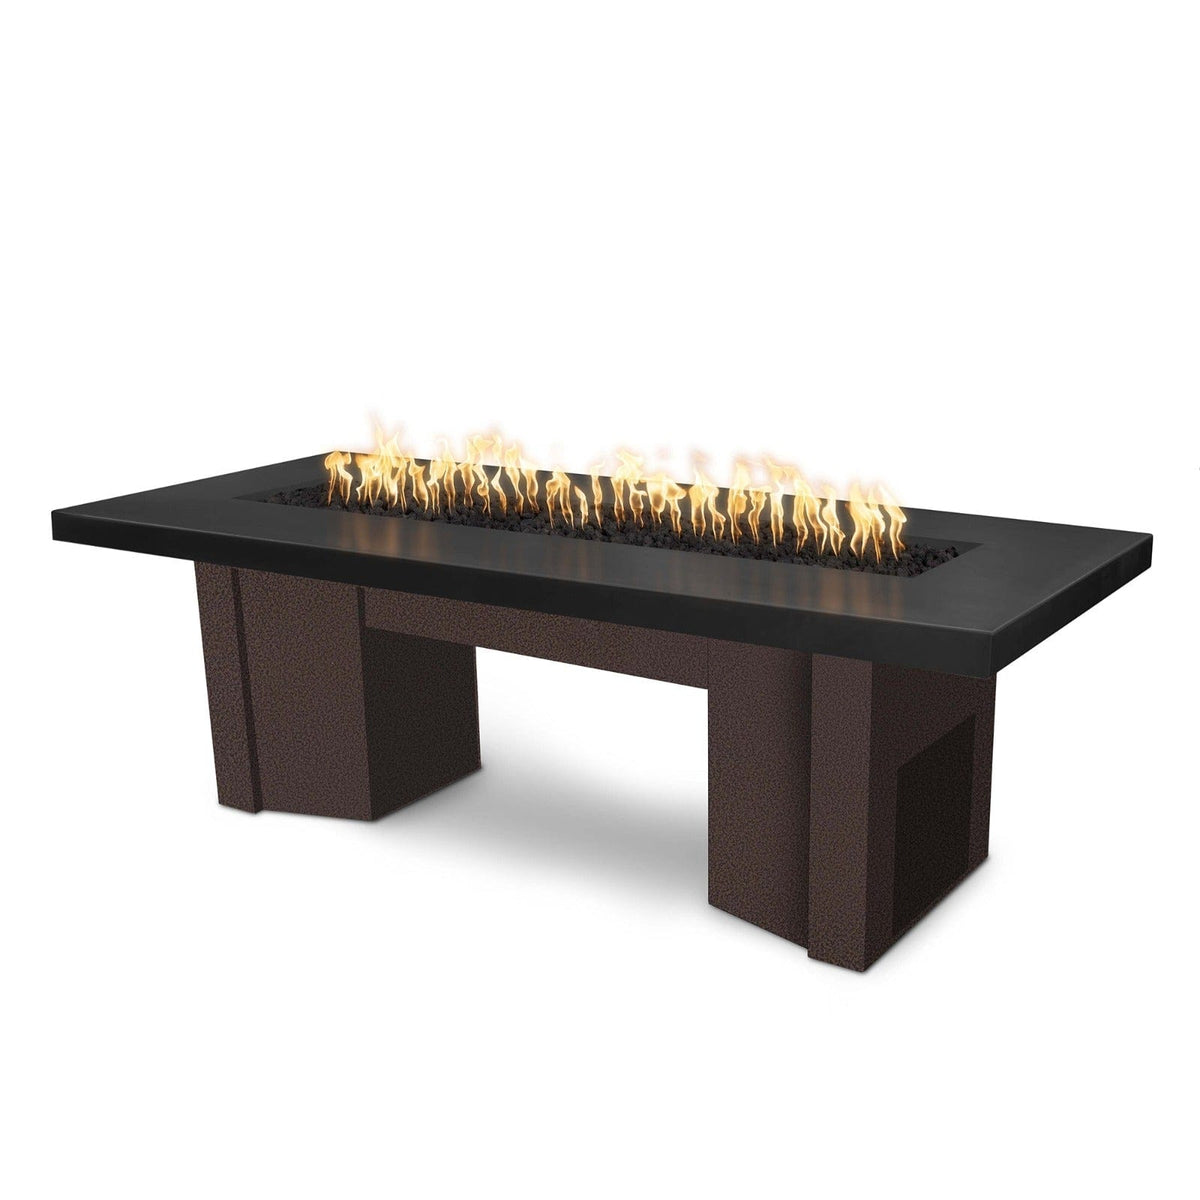 The Outdoor Plus Fire Features Black (-BLK) / Copper Vein Powder Coated Steel (-CPV) The Outdoor Plus 78&quot; Alameda Fire Table Smooth Concrete in Natural Gas - Flame Sense System with Push Button Spark Igniter / OPT-ALMGFRC78FSEN-NG